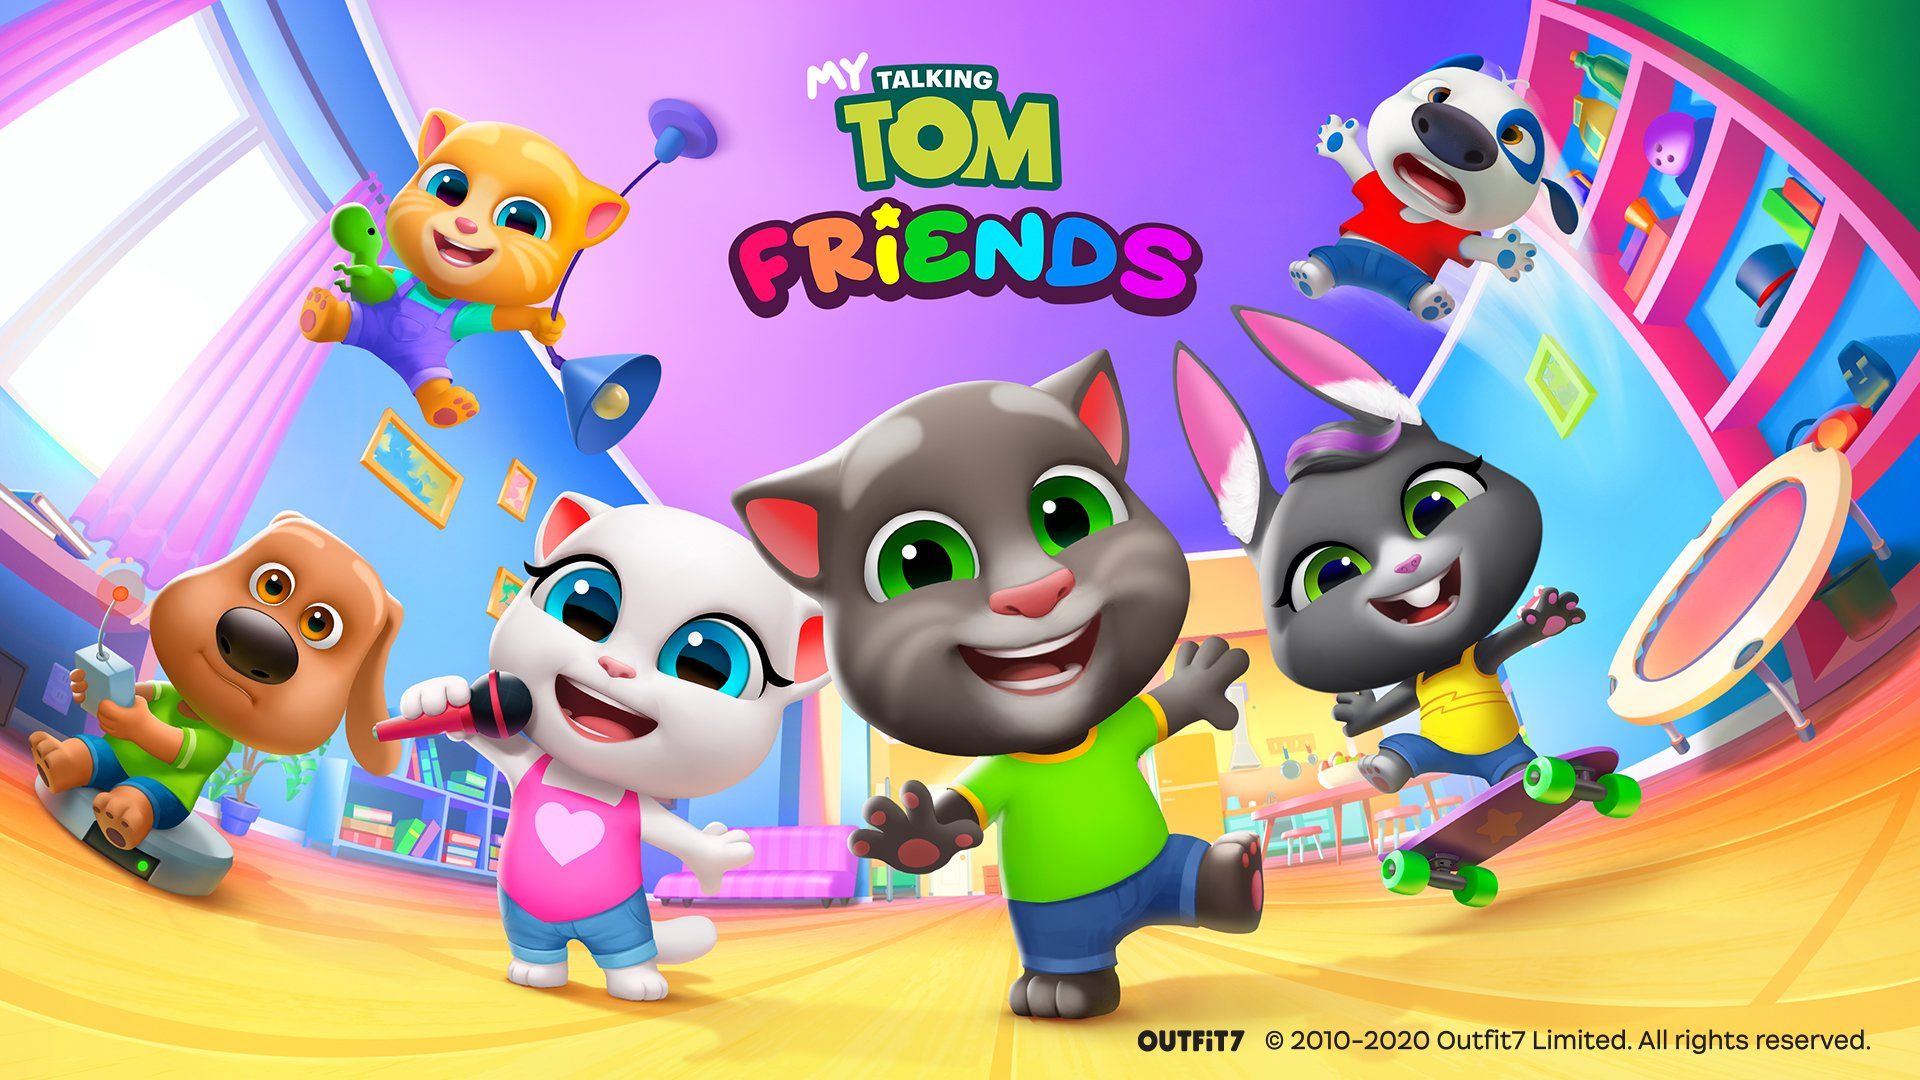 My Talking Tom Friends: A SuperParent First Look